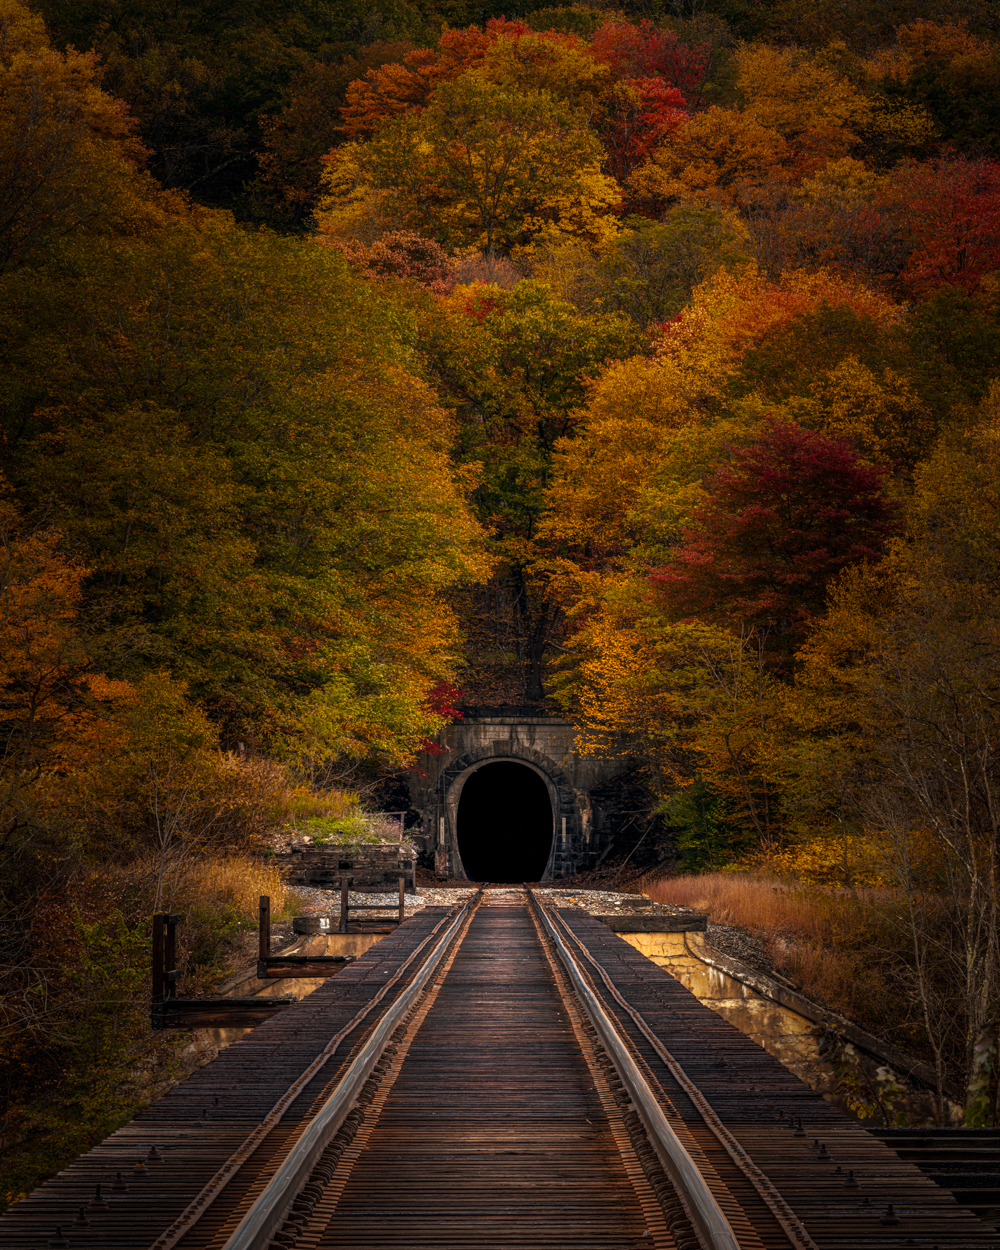 Under a canopy of fiery foliage, the tracks lead to a mysterious tunnel, an alluring passageway to a realm where autumn reigns...